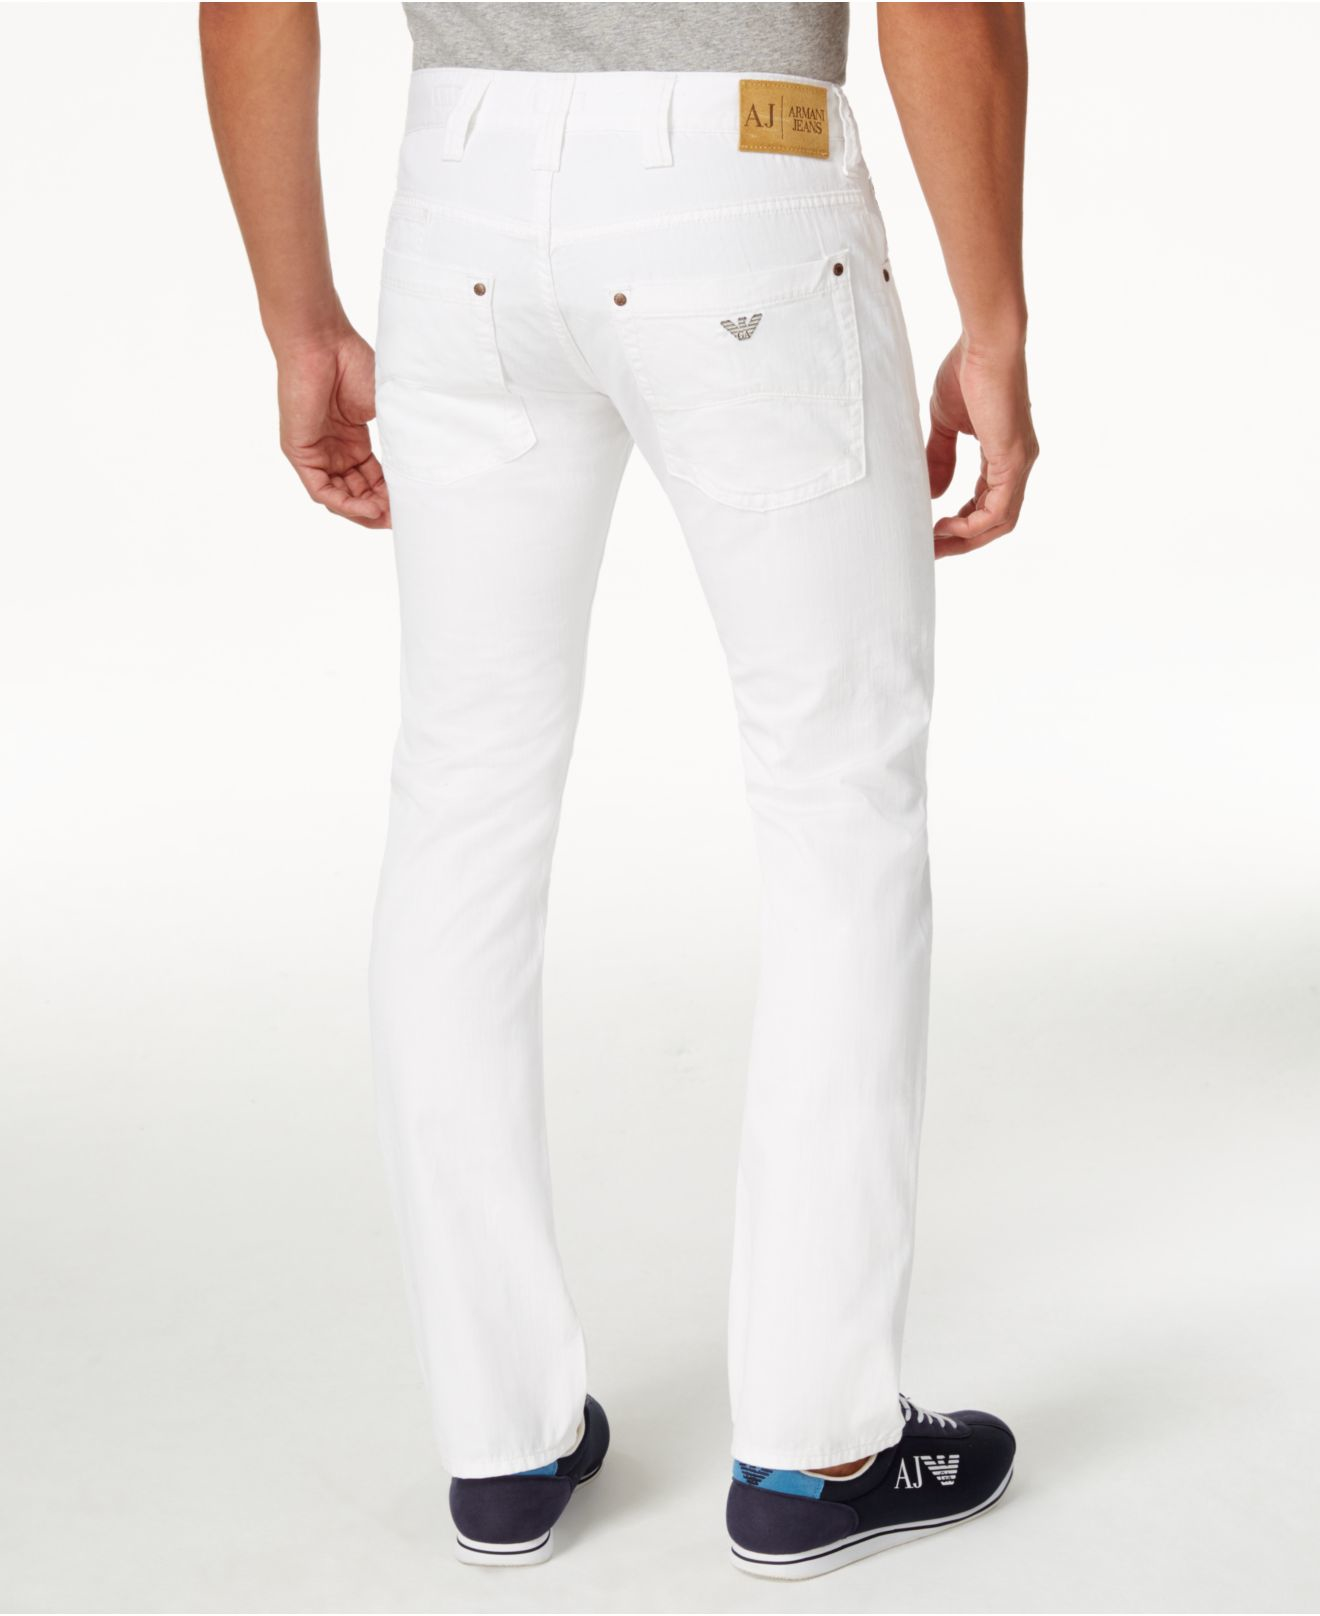 Armani Jeans Men's Slim-fit Jeans in for | Lyst